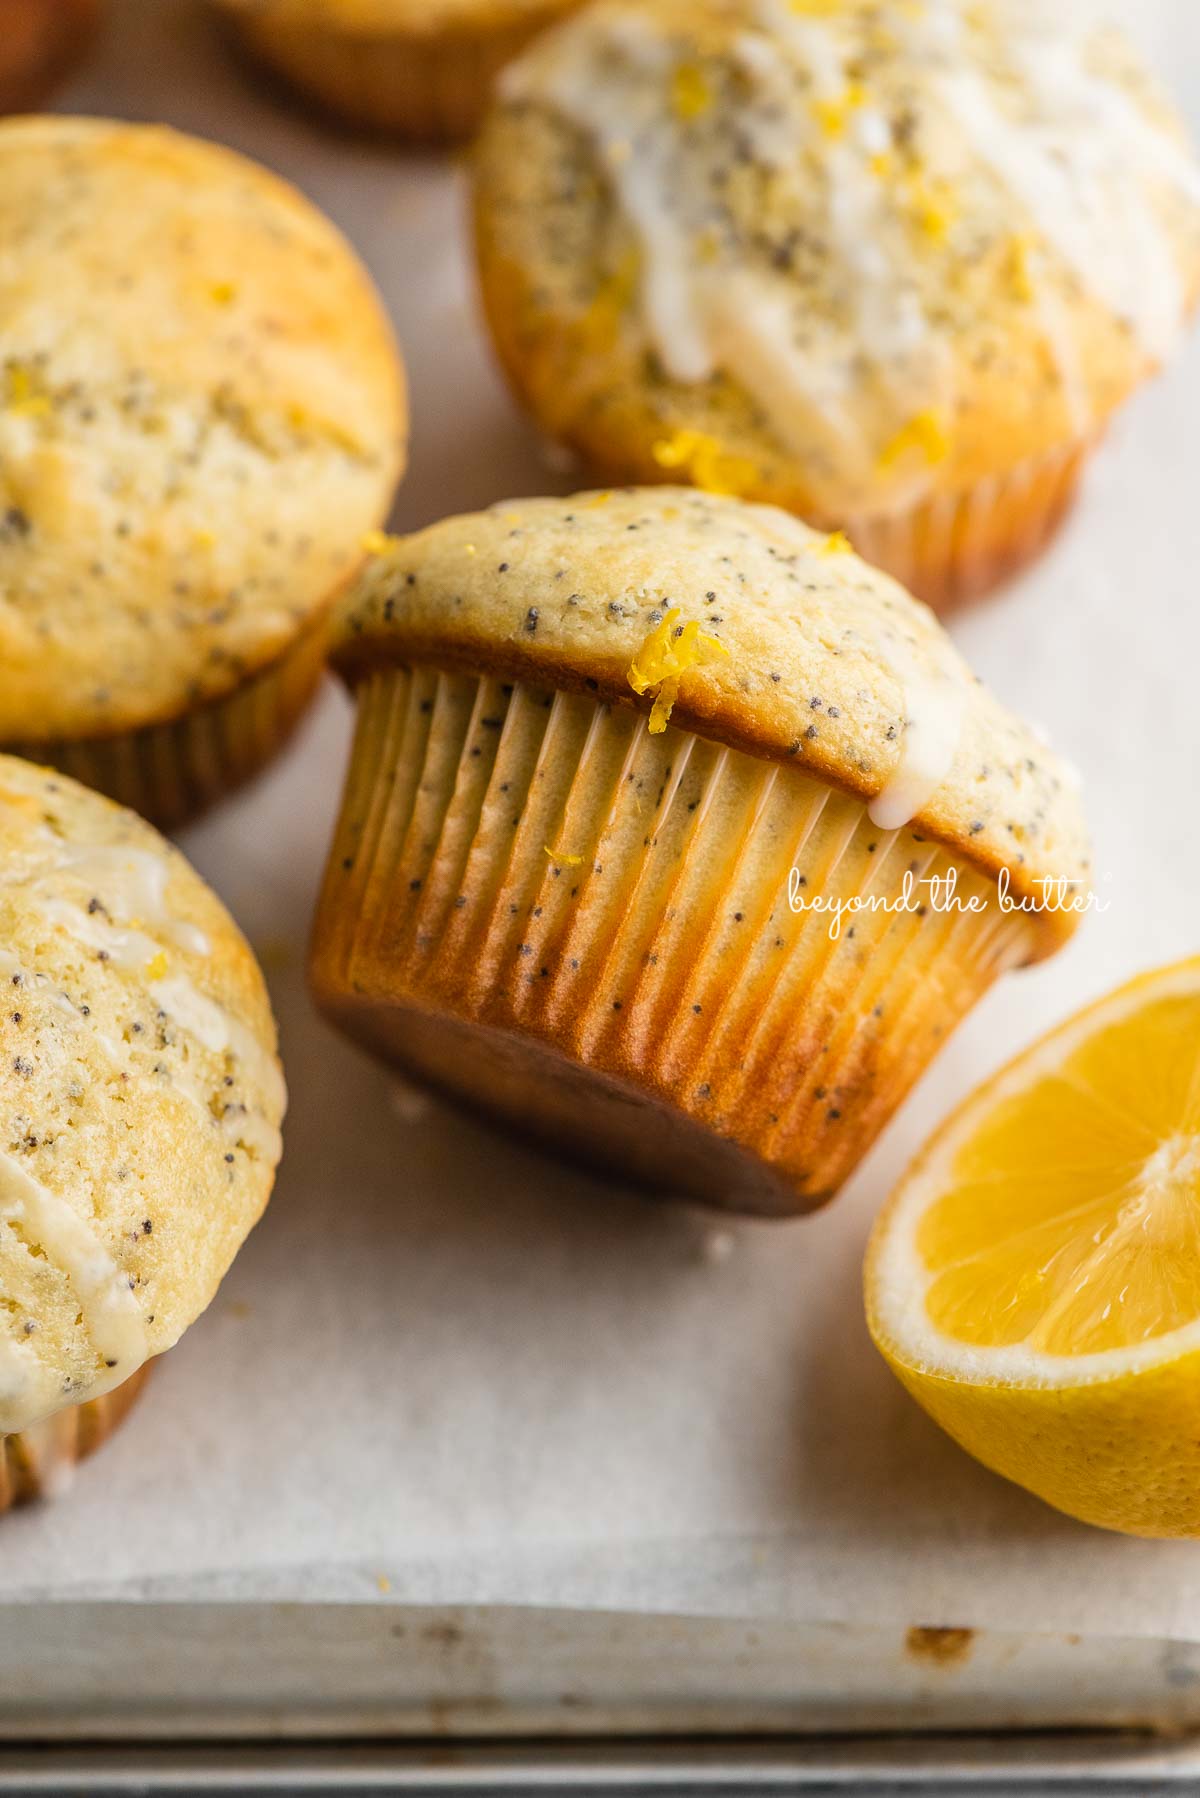 Randomly placed lemon poppy seed muffins on a parchment paper-lined baking sheet with half of a lemon.